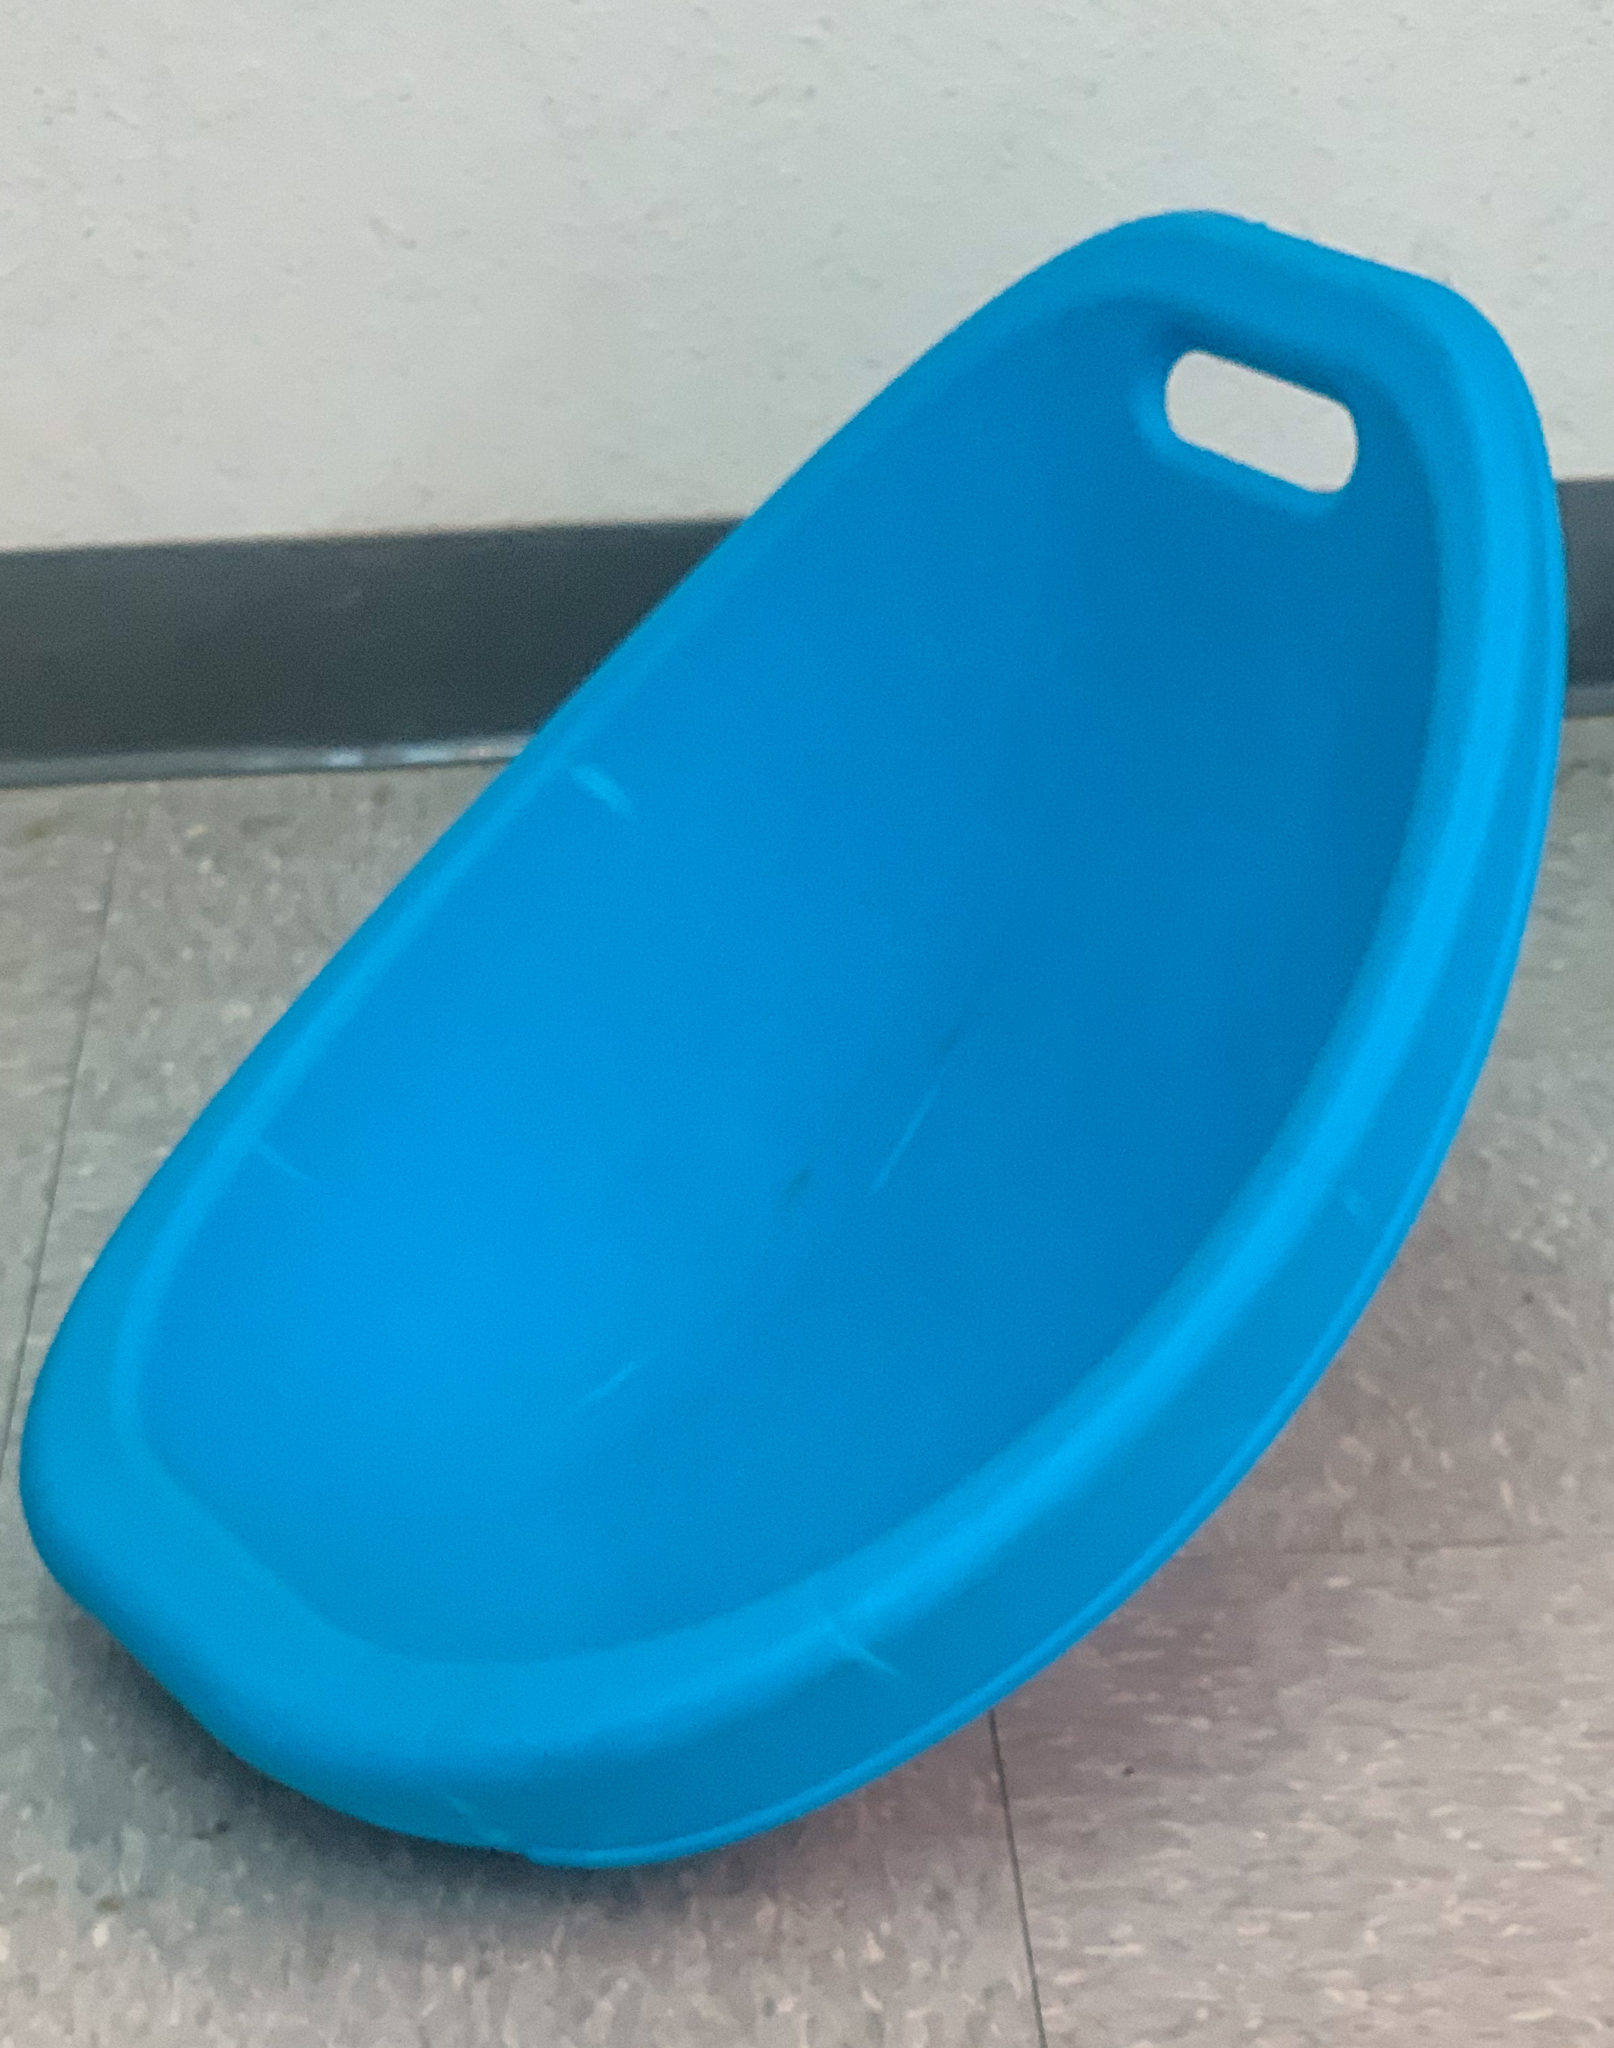 This is a photo of the scoop rockers I use in my classroom.